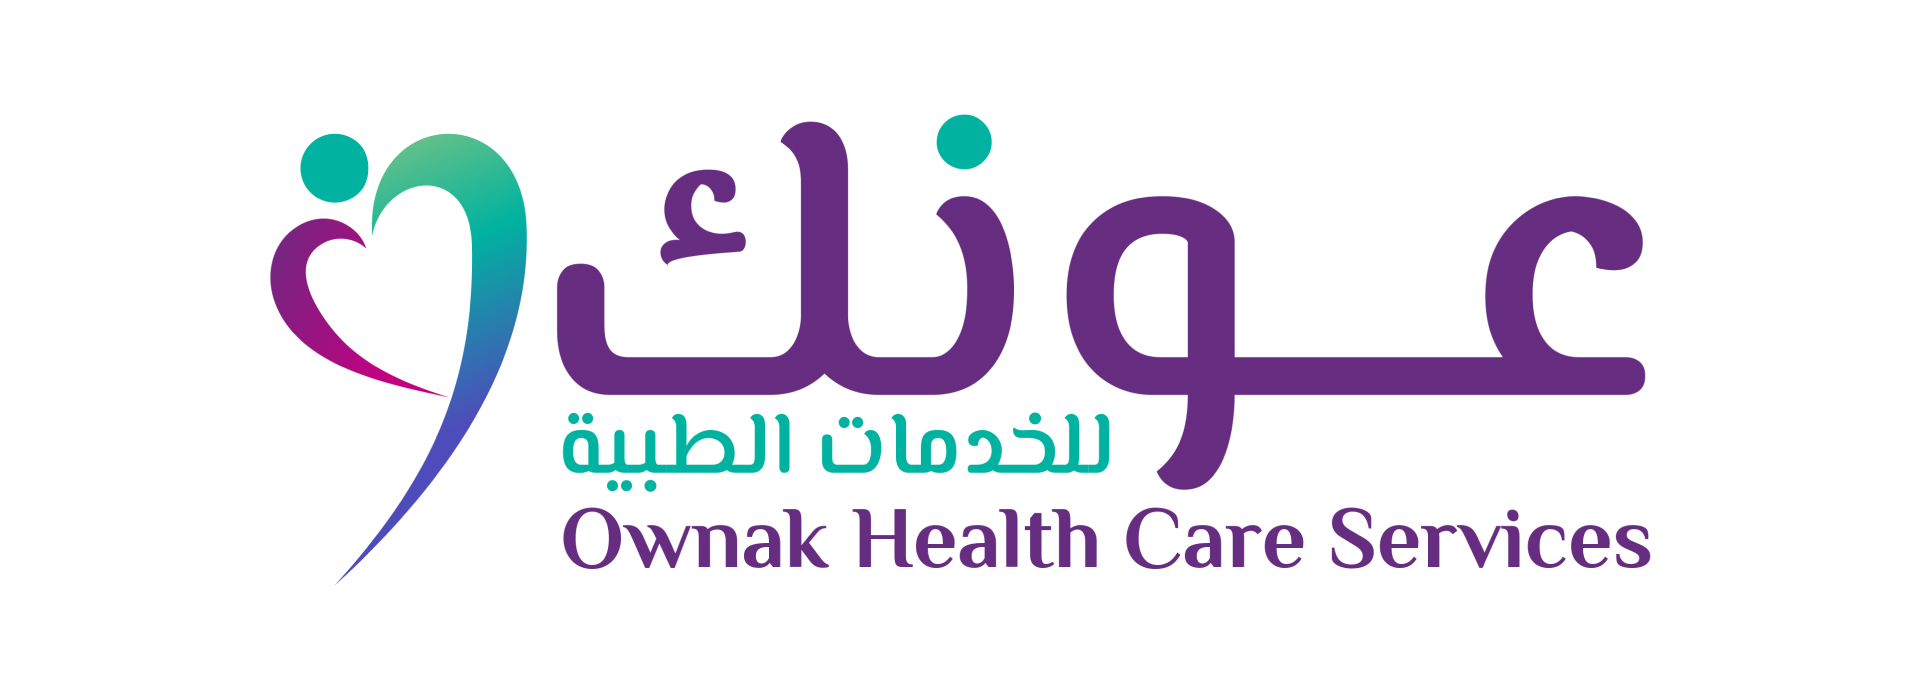 Ownak Health Care Services